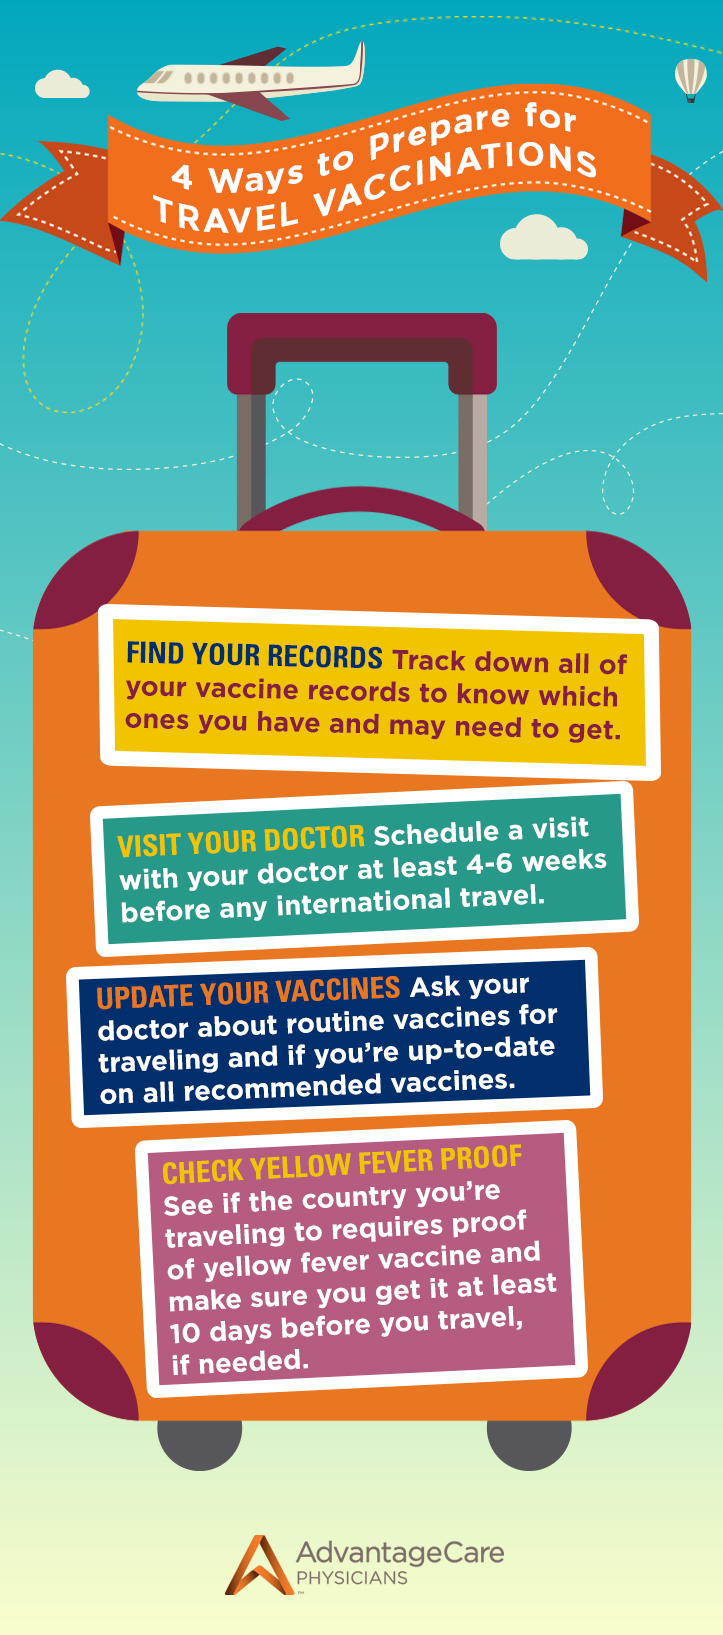 4 ways to prepare for travel vaccinations